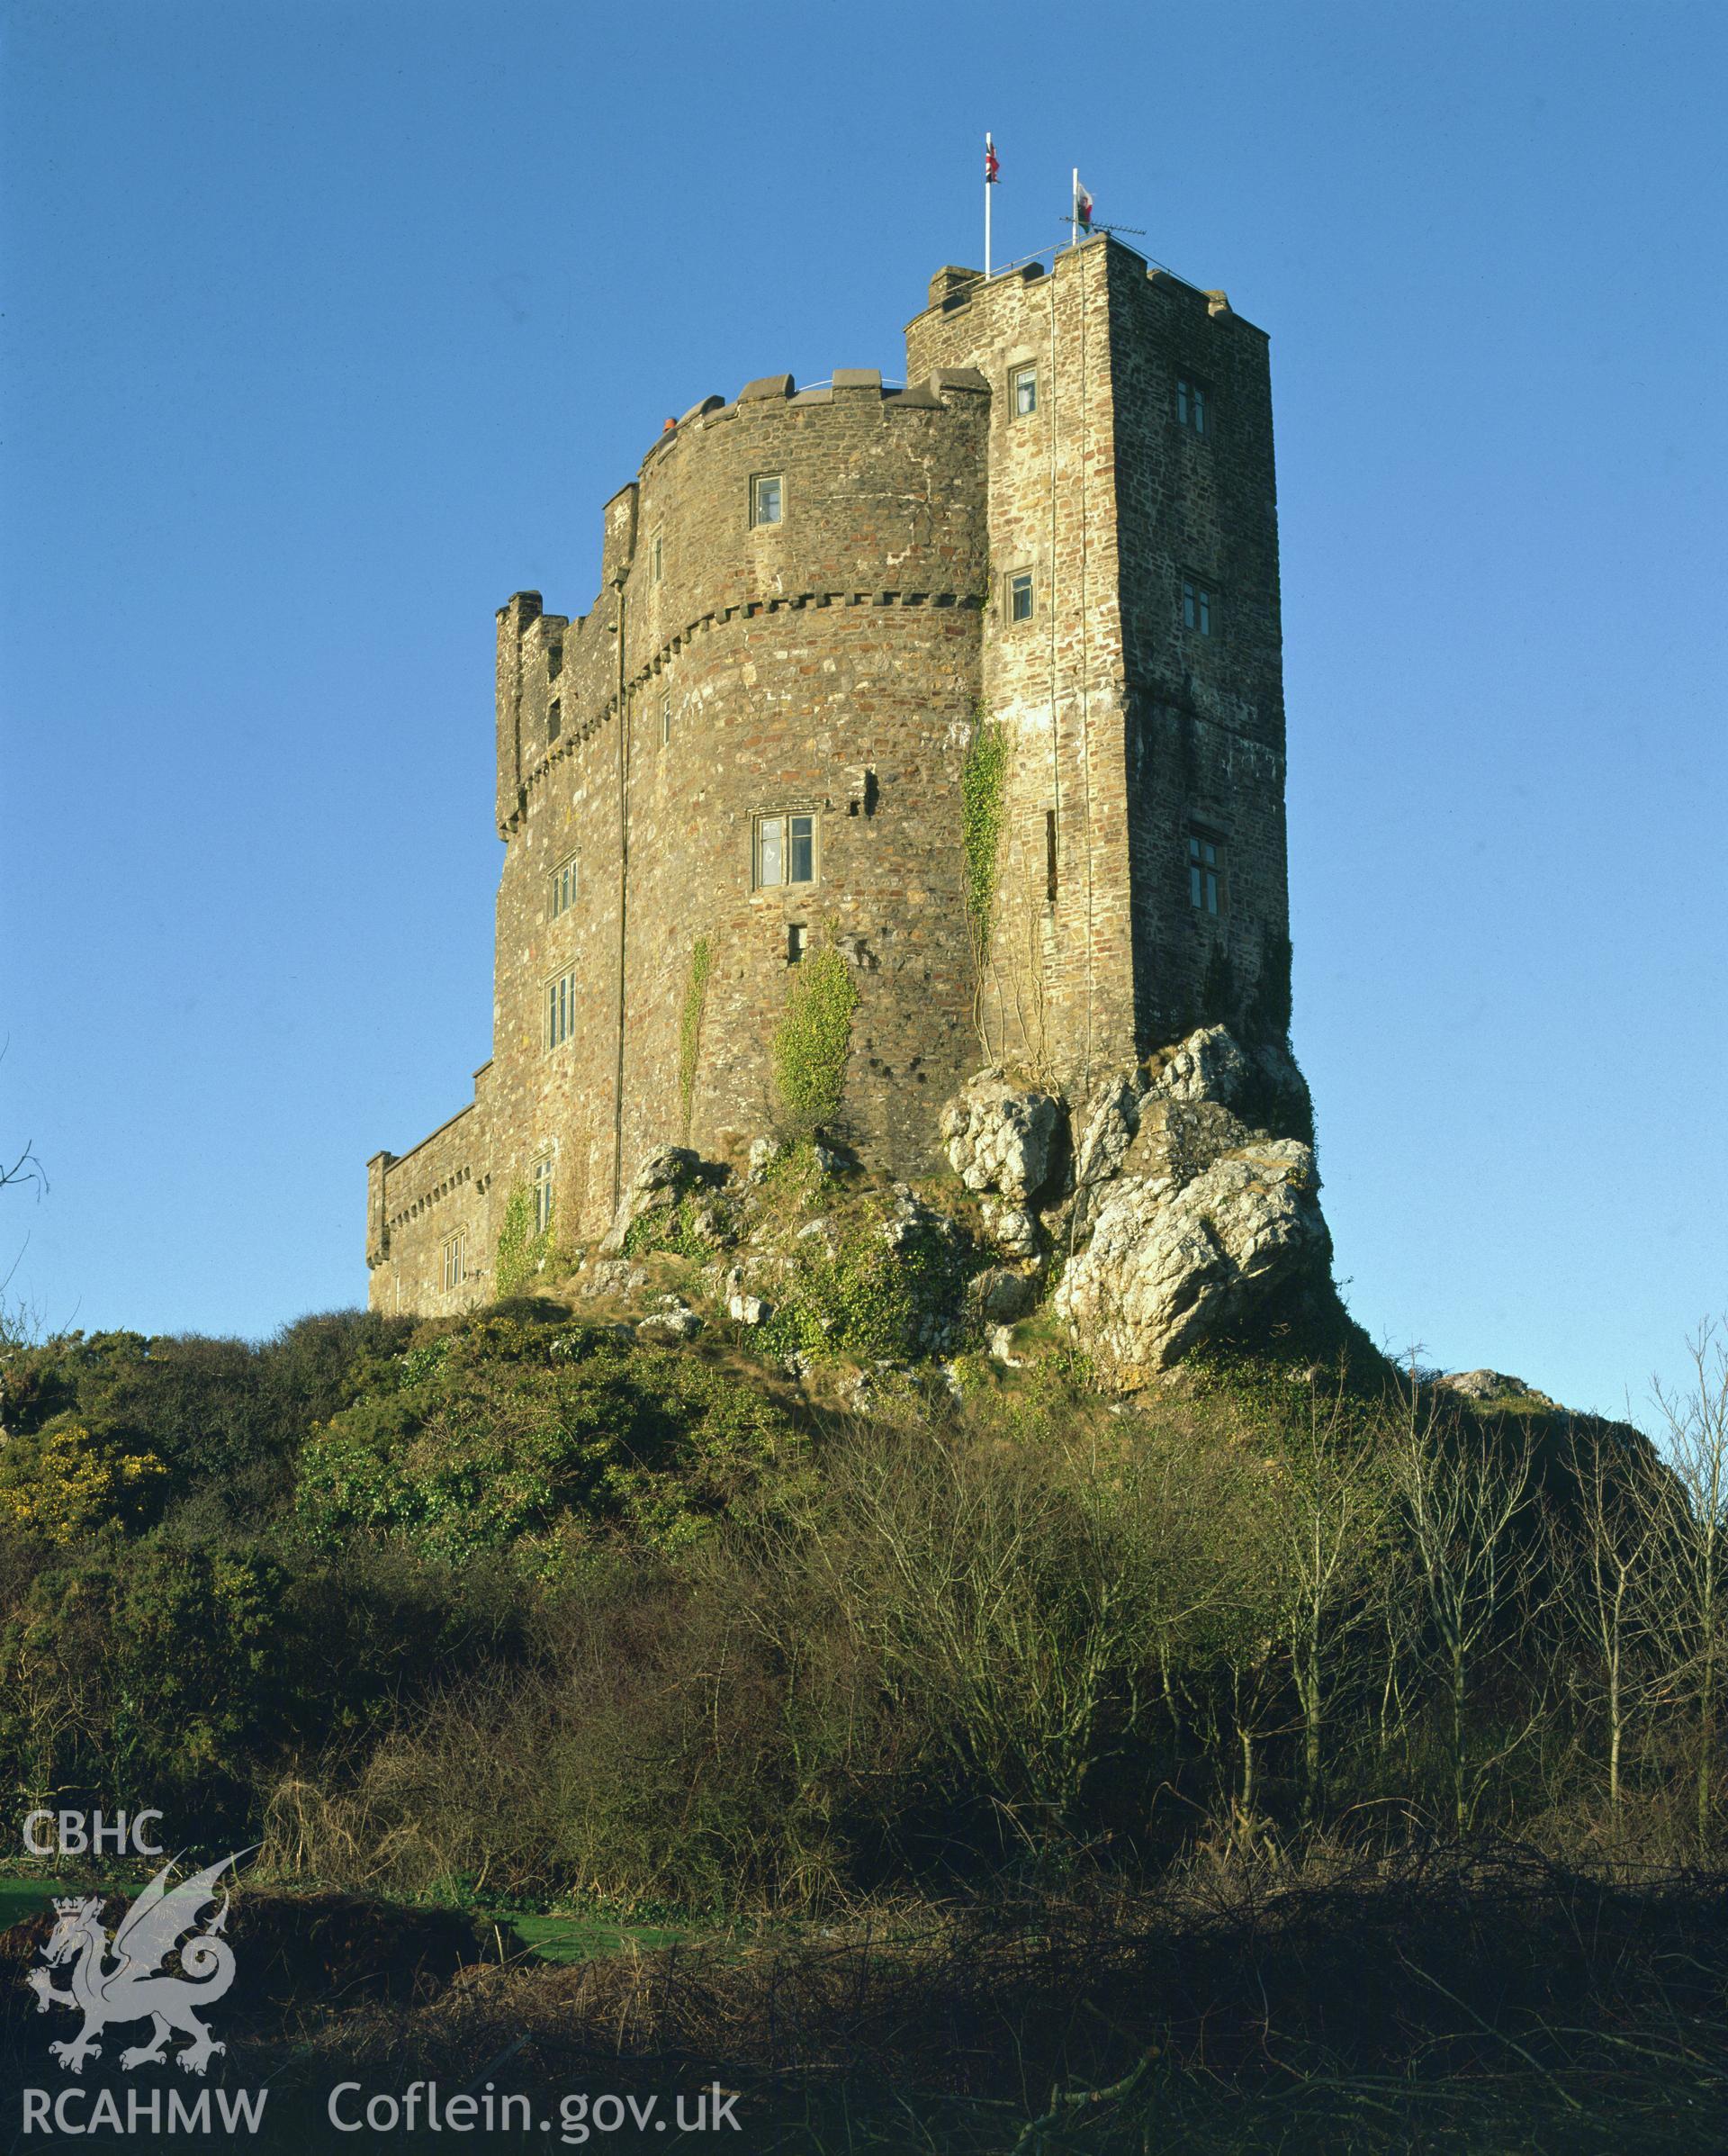 RCAHMW colour transparency showing view of Roch Castle, taken by Iain Wright, 2003.